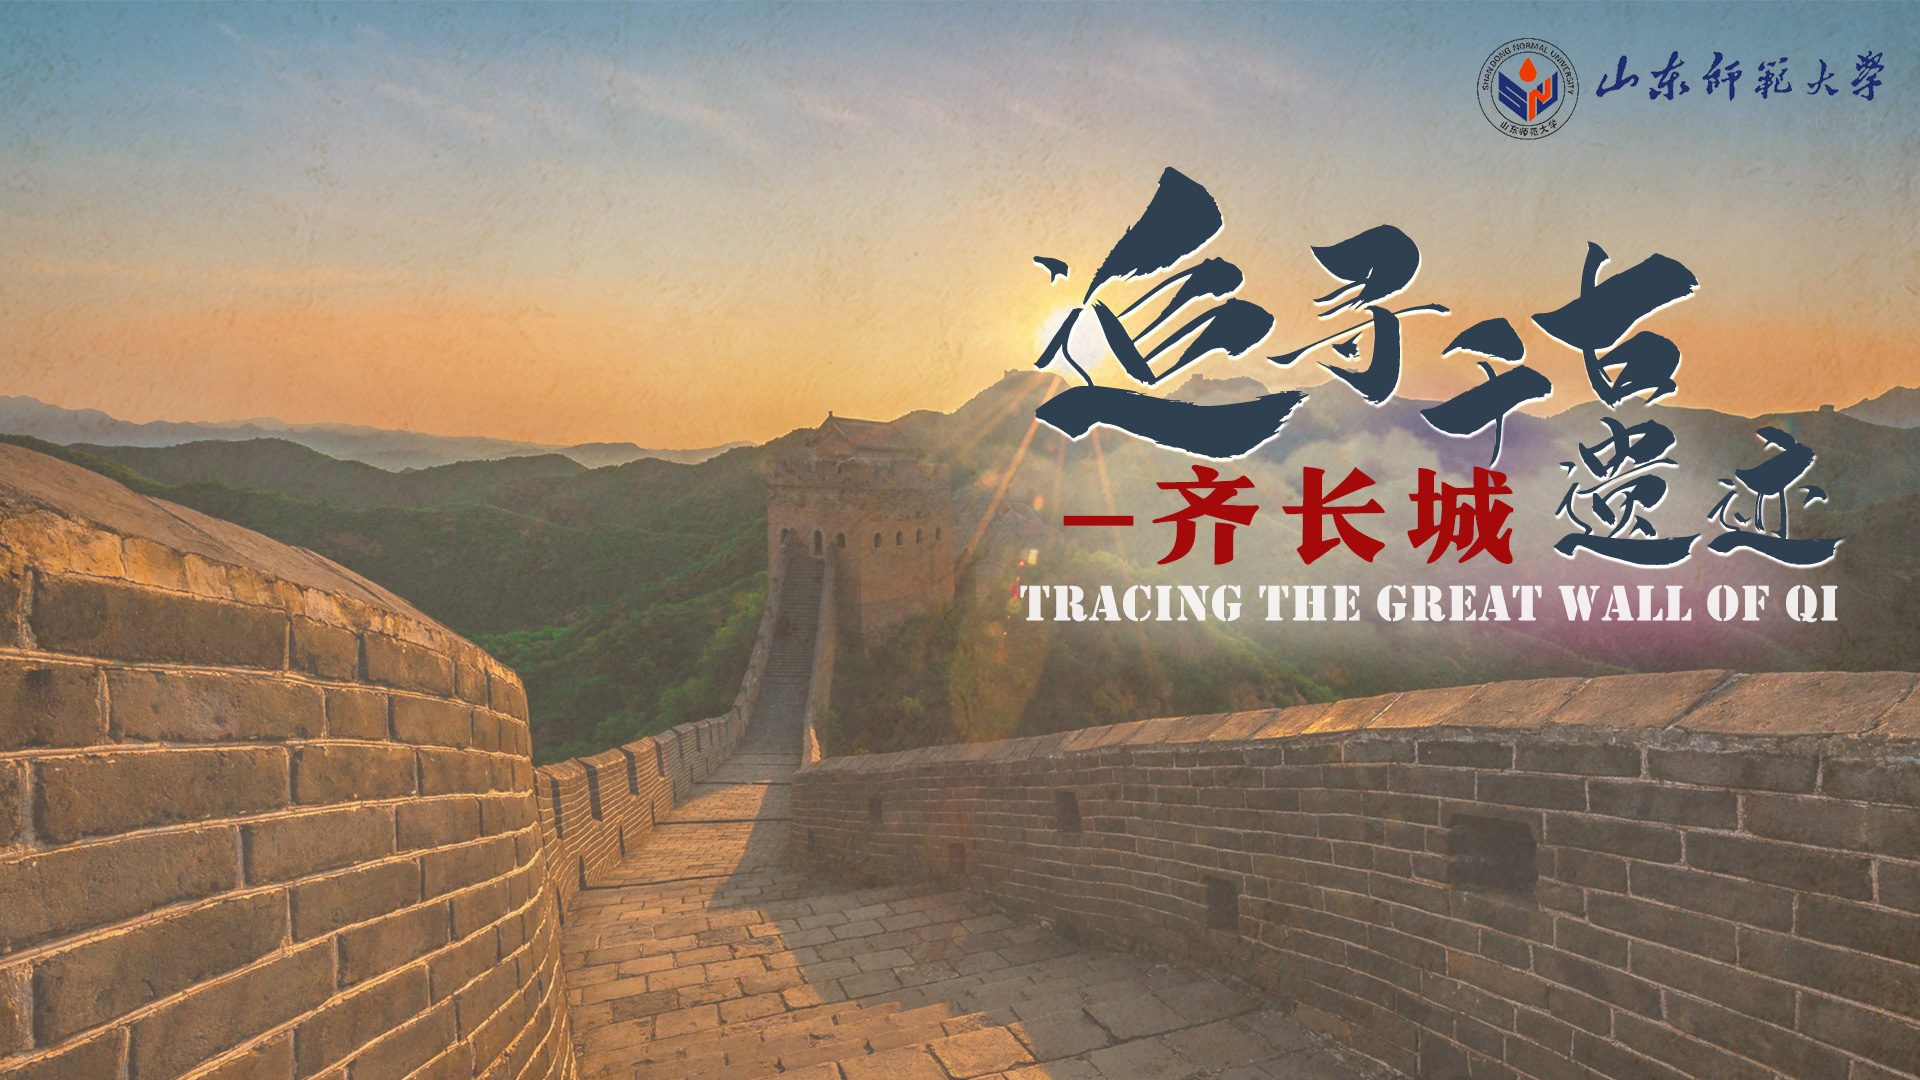 Tracing the Great Wall of Qi